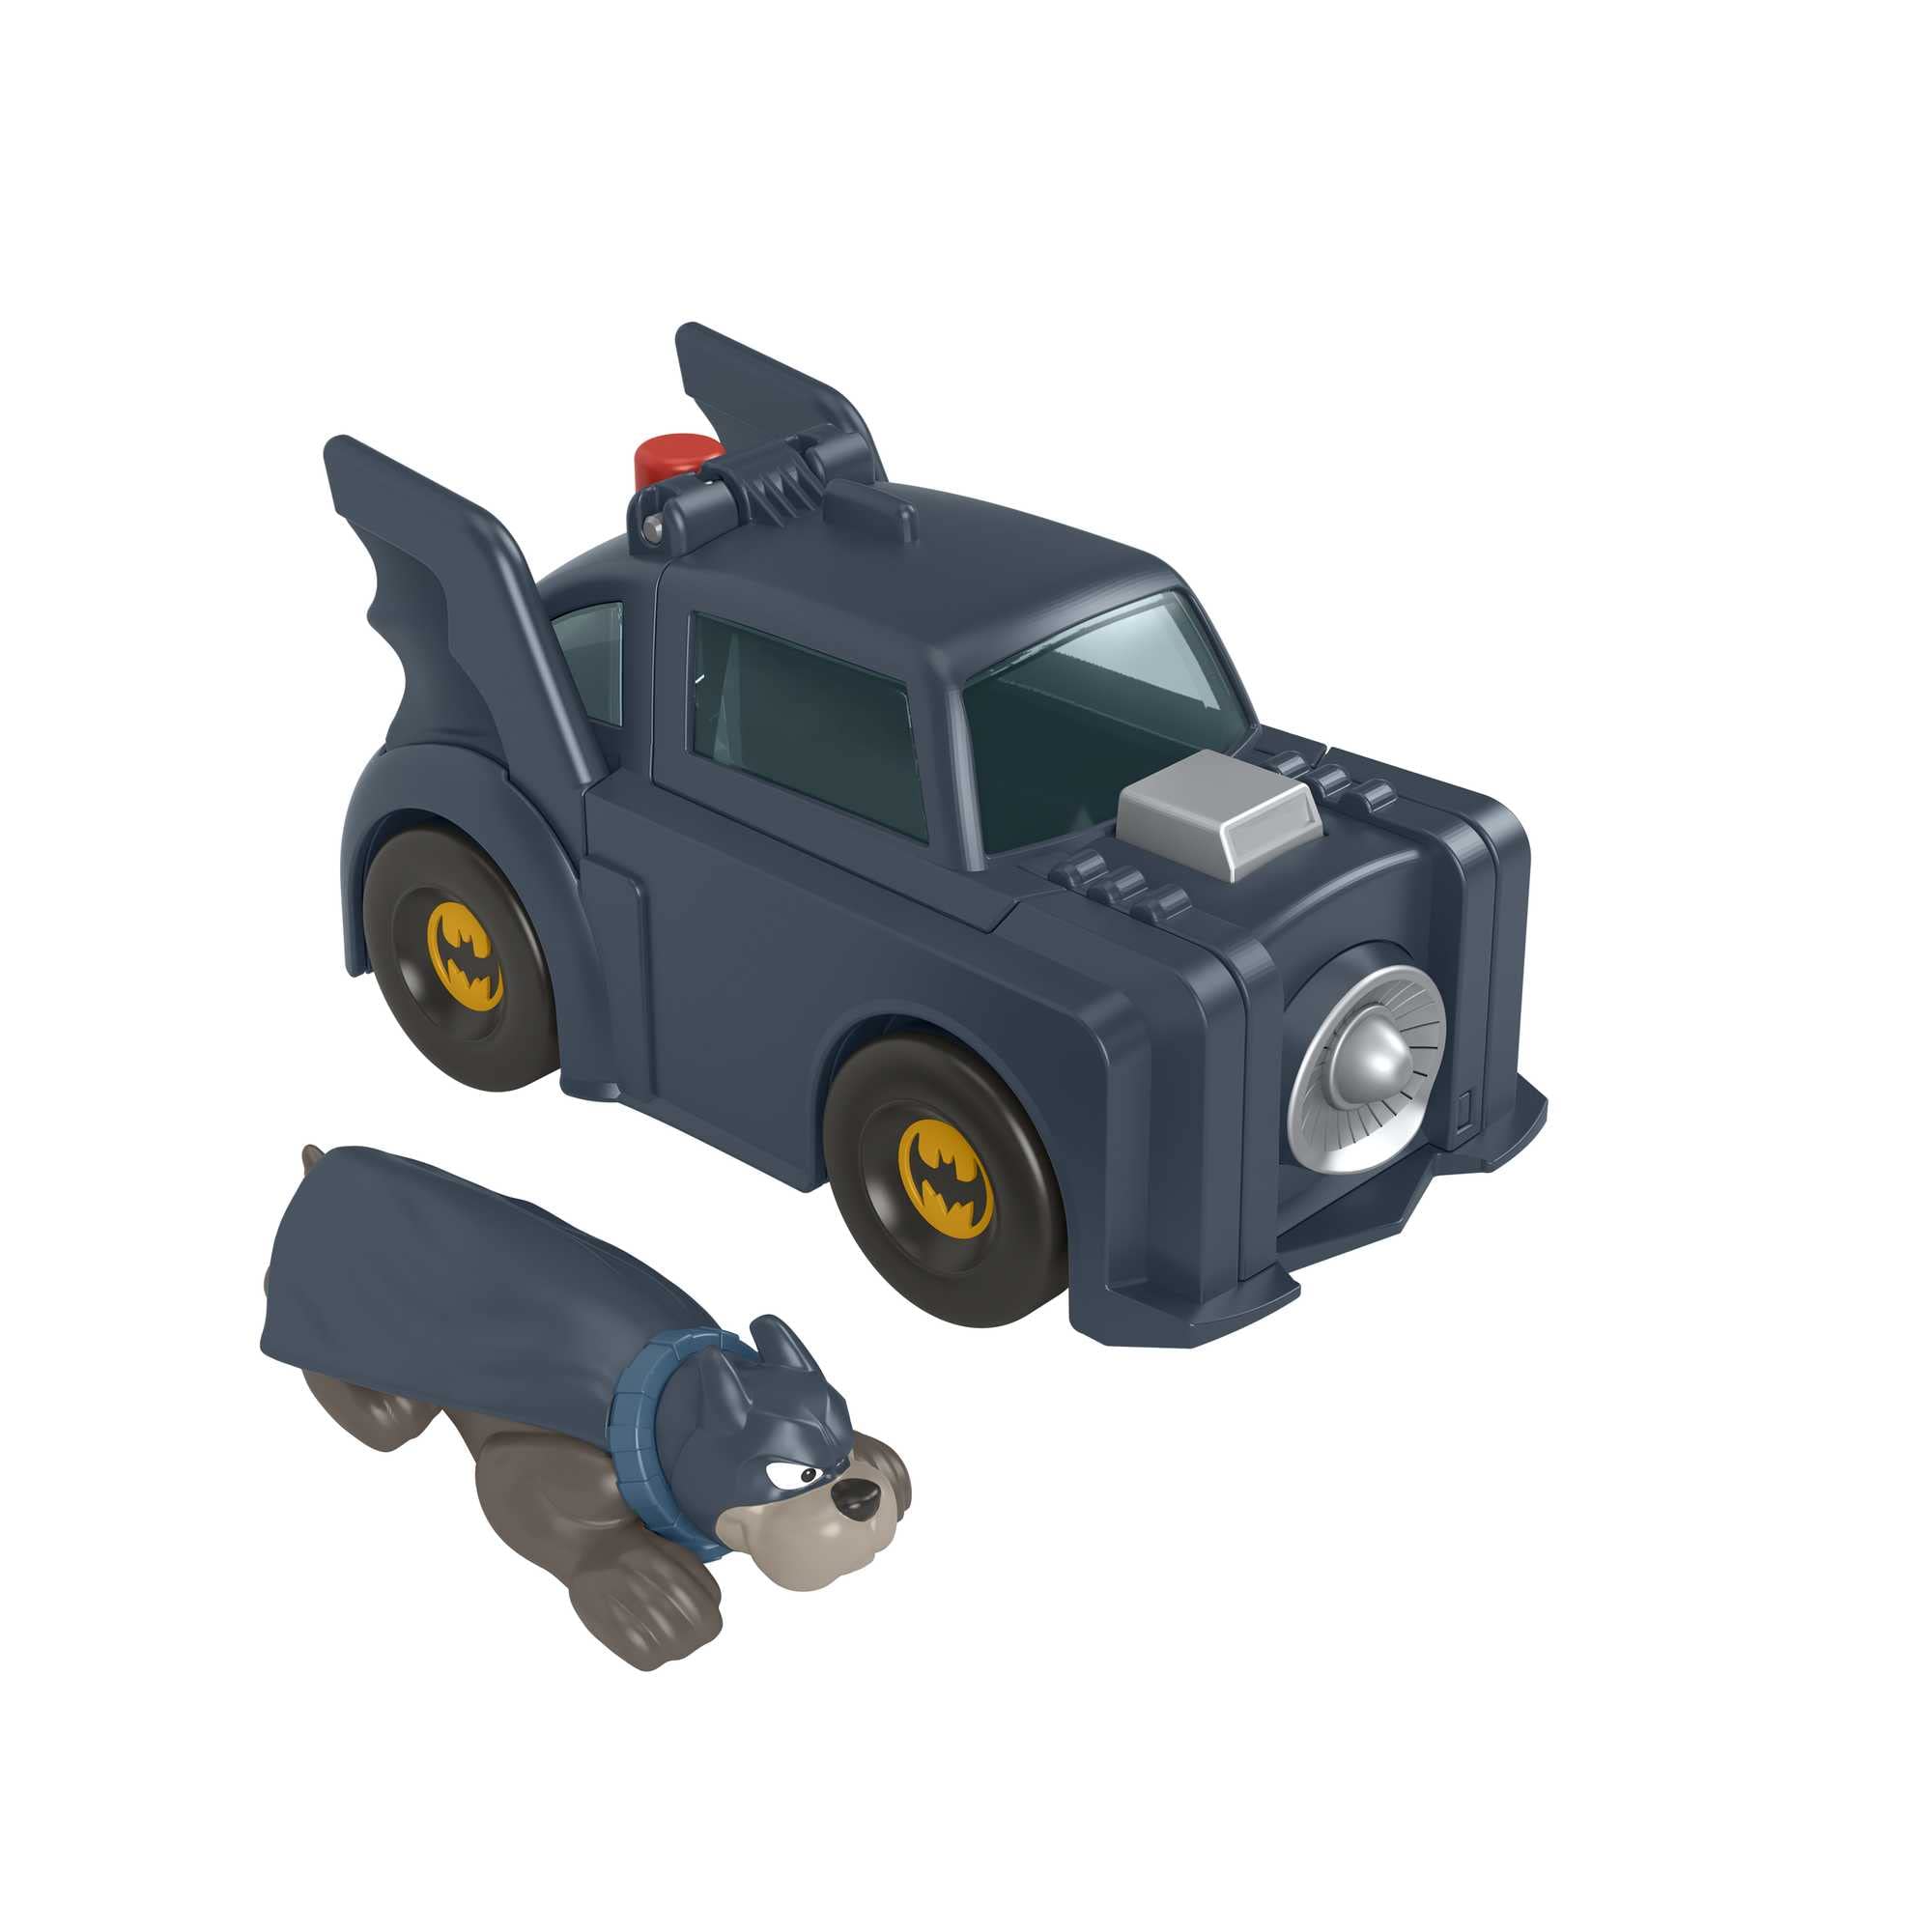 Fisher-Price DC League of Super-Pets Toys: Ace & Batmobile Super Launch $5.96, 6-Piece League of Super-Pets $8.36, & More + Free Shipping w/ Prime or on $25+